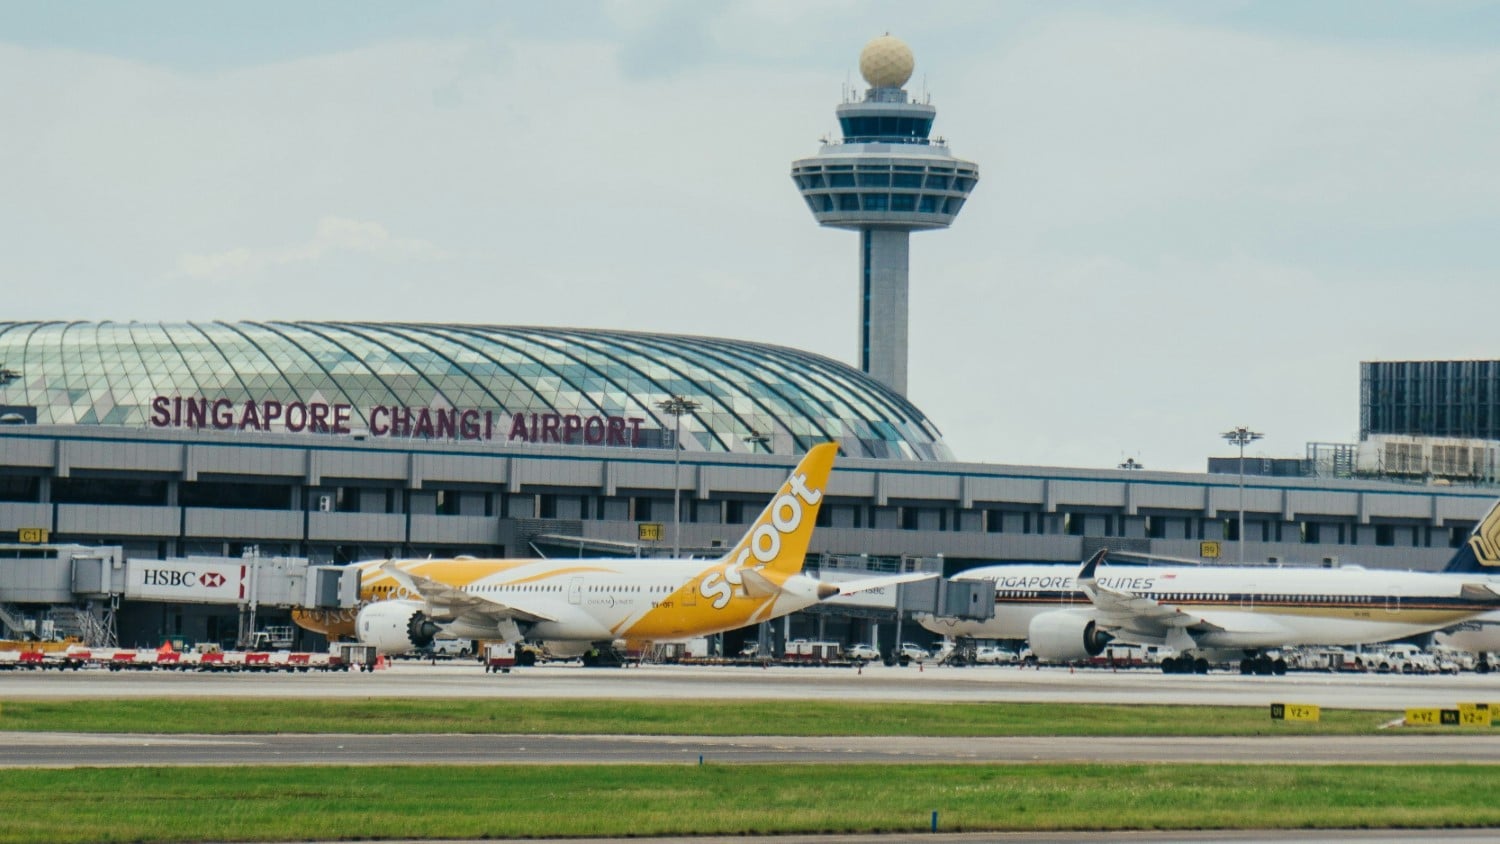 Scoot plane parked at Singapore Changi airport.